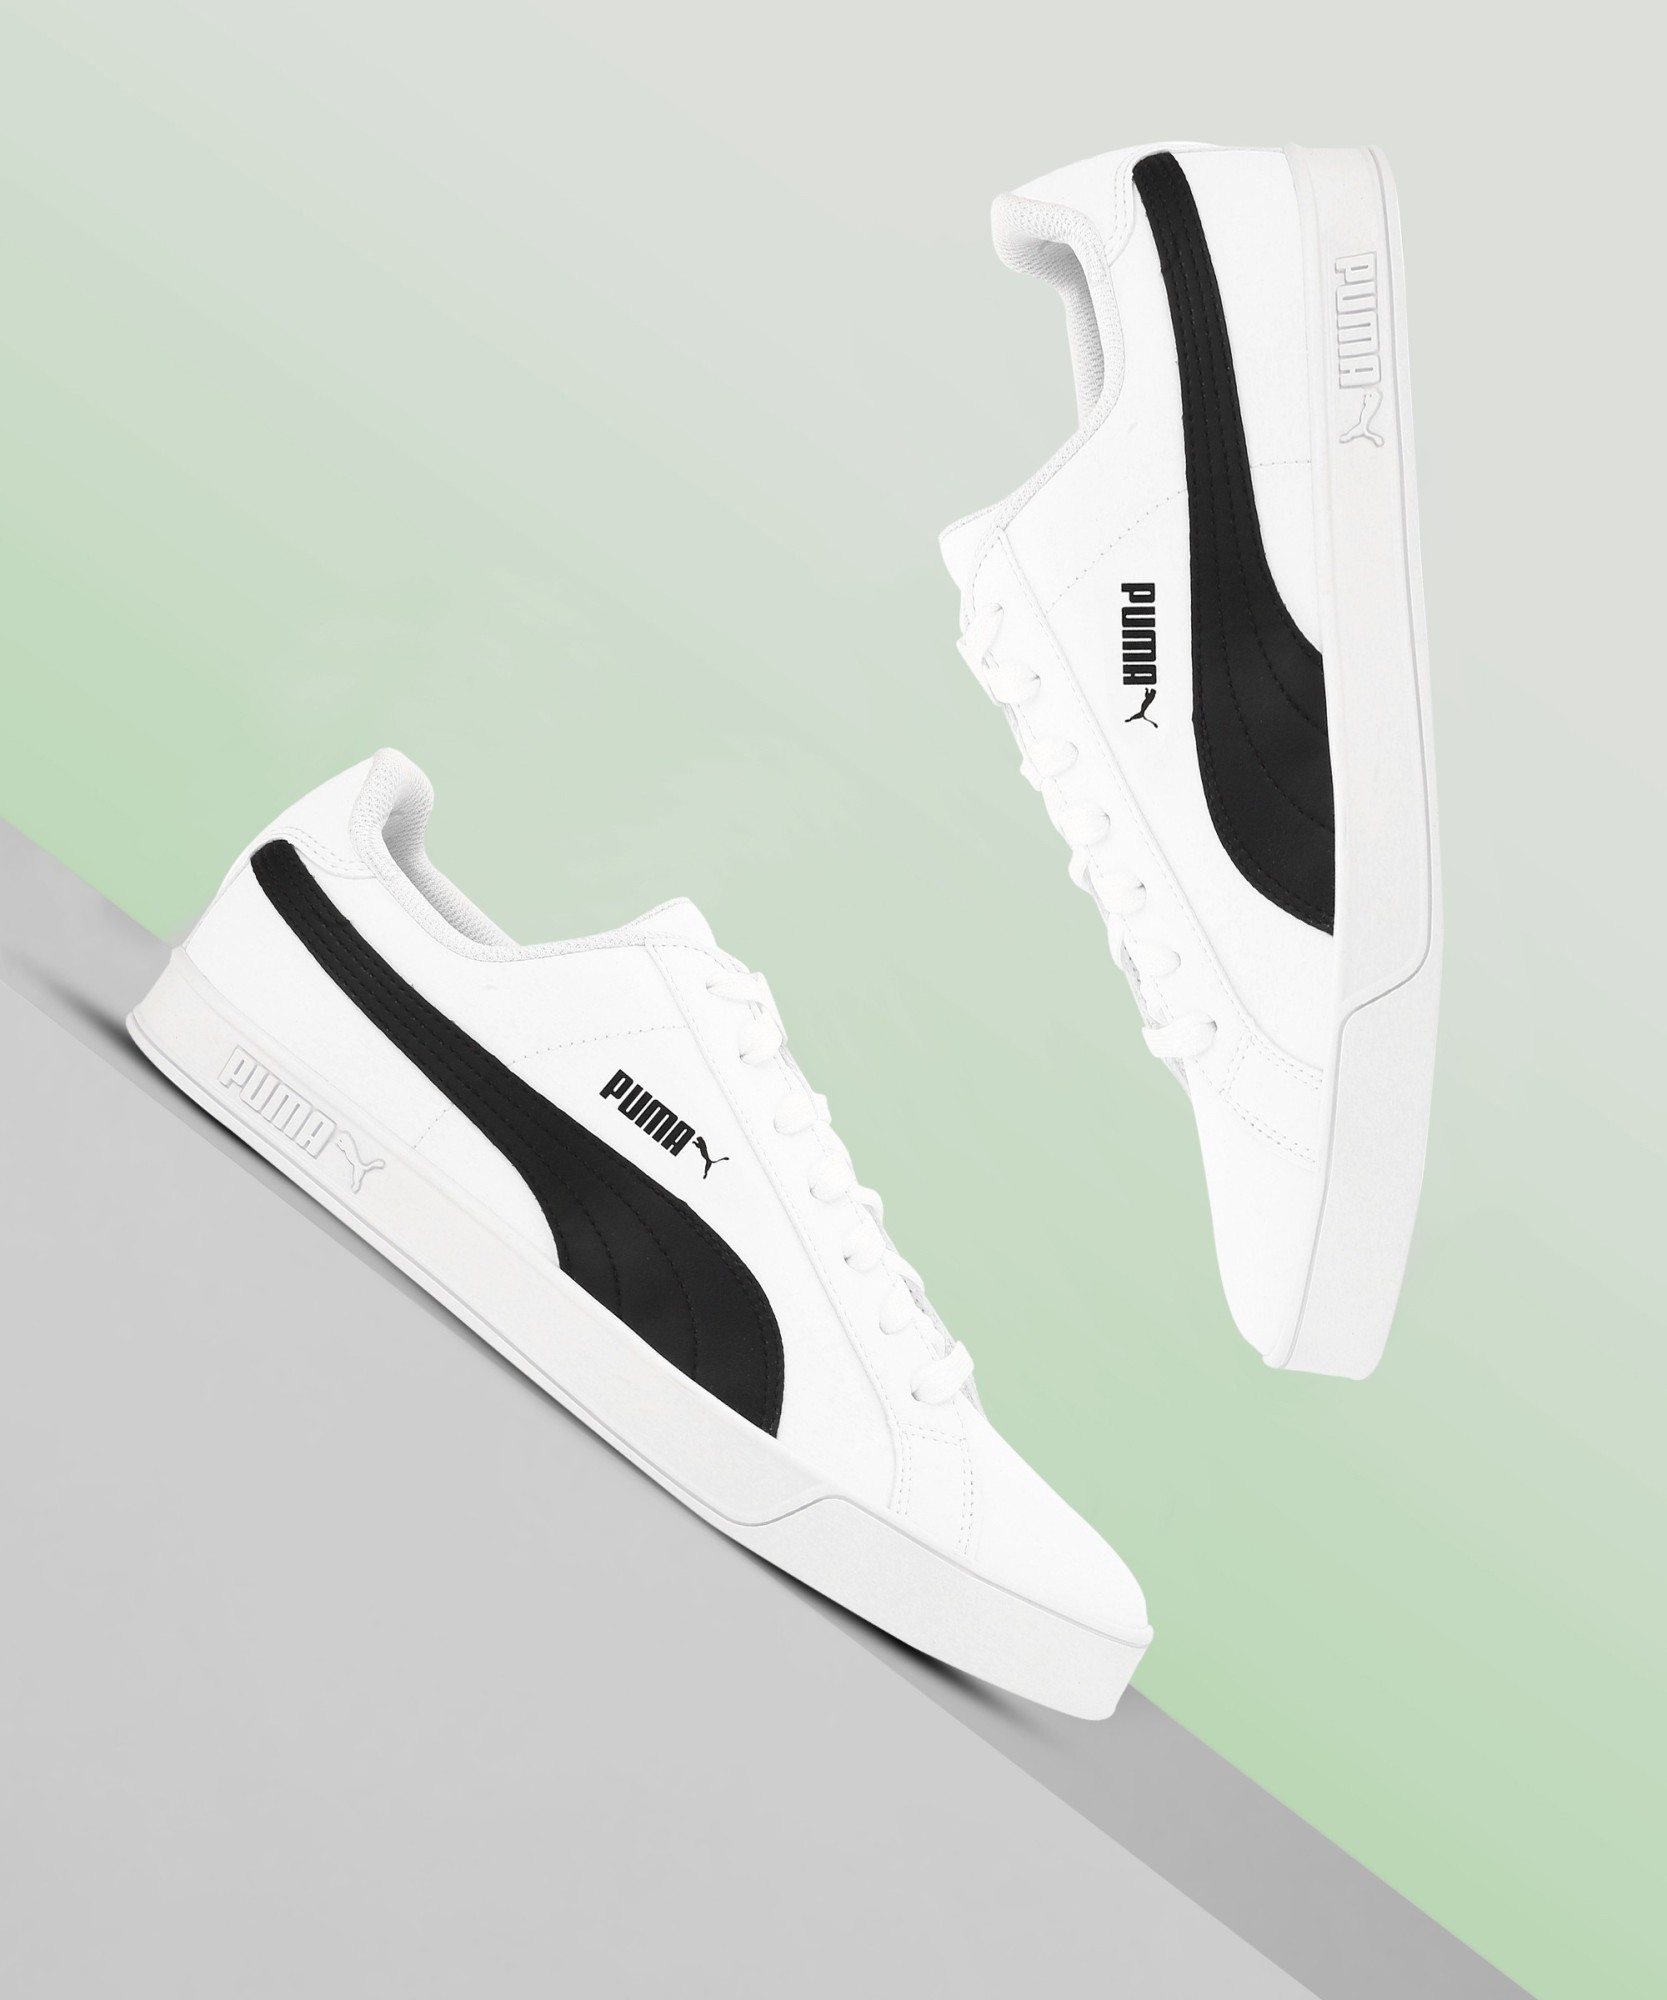 Puma Basket Classic one8 Unisex Sneakers Men [368202] White 10 in Hyderabad  at best price by Cls Distributors - Justdial